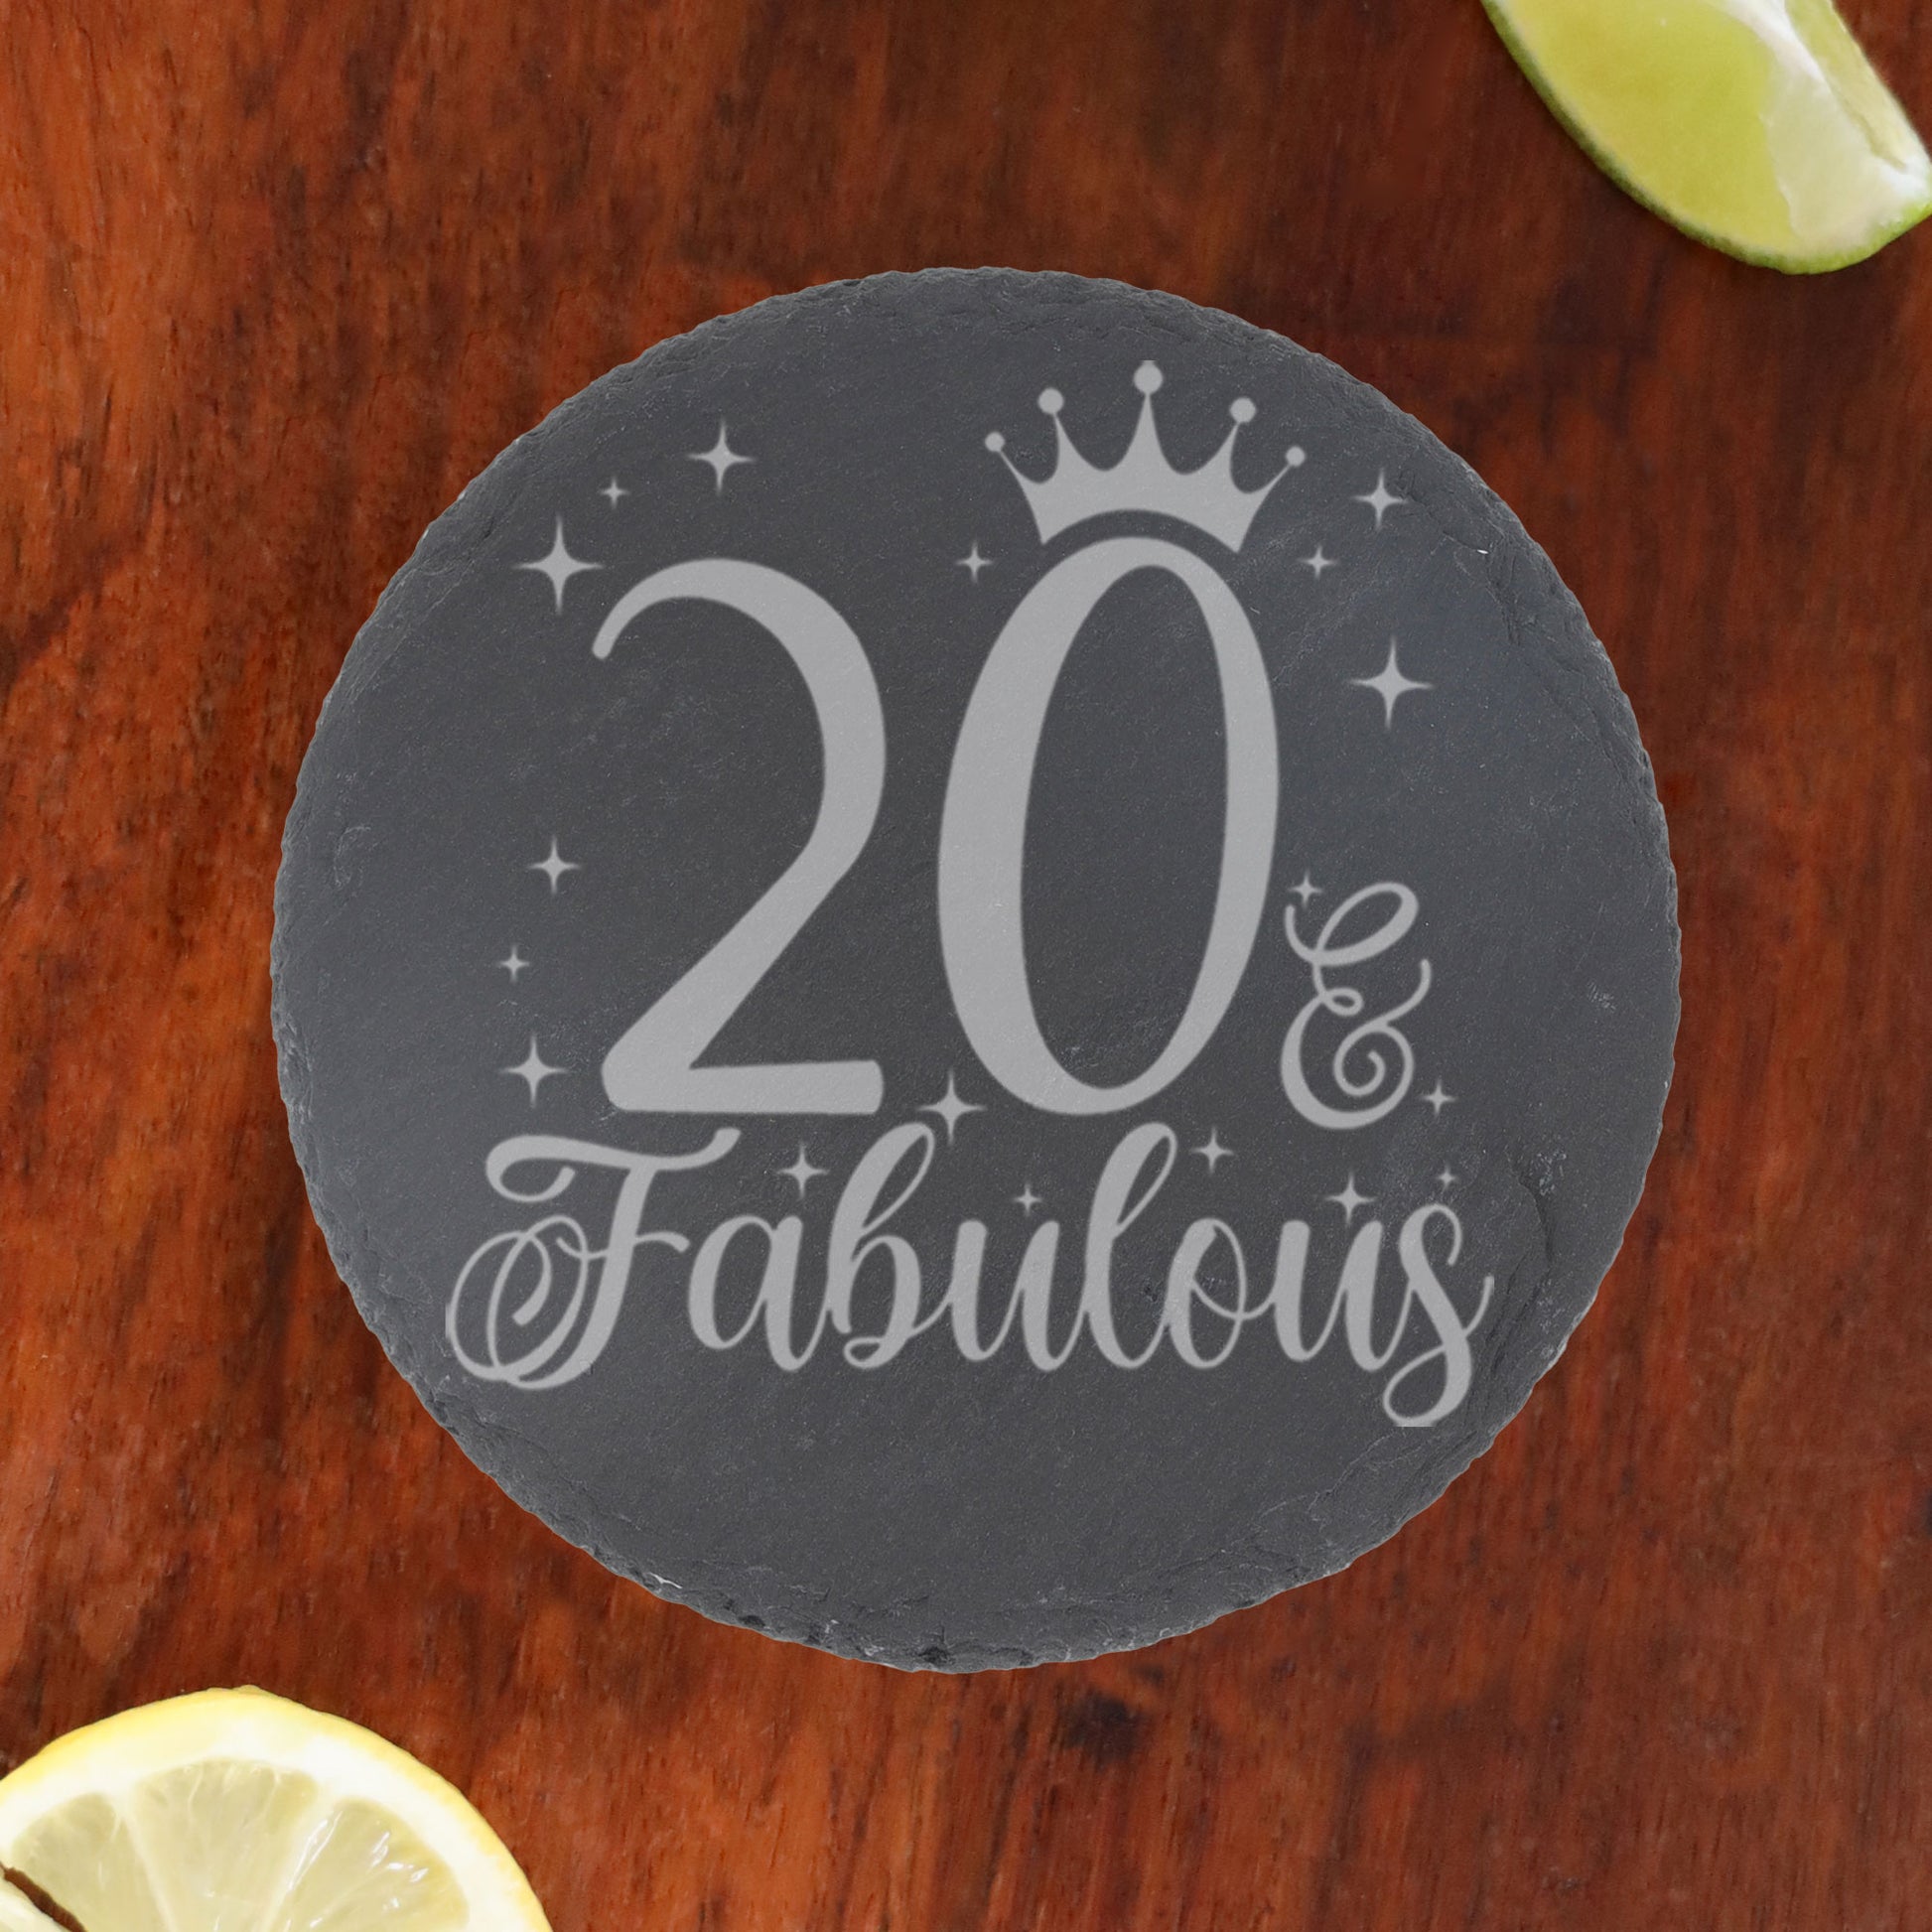 20 & Fabulous 20th Birthday Gift Engraved Wine Glass and/or Coaster Set  - Always Looking Good - Round Coaster Only  